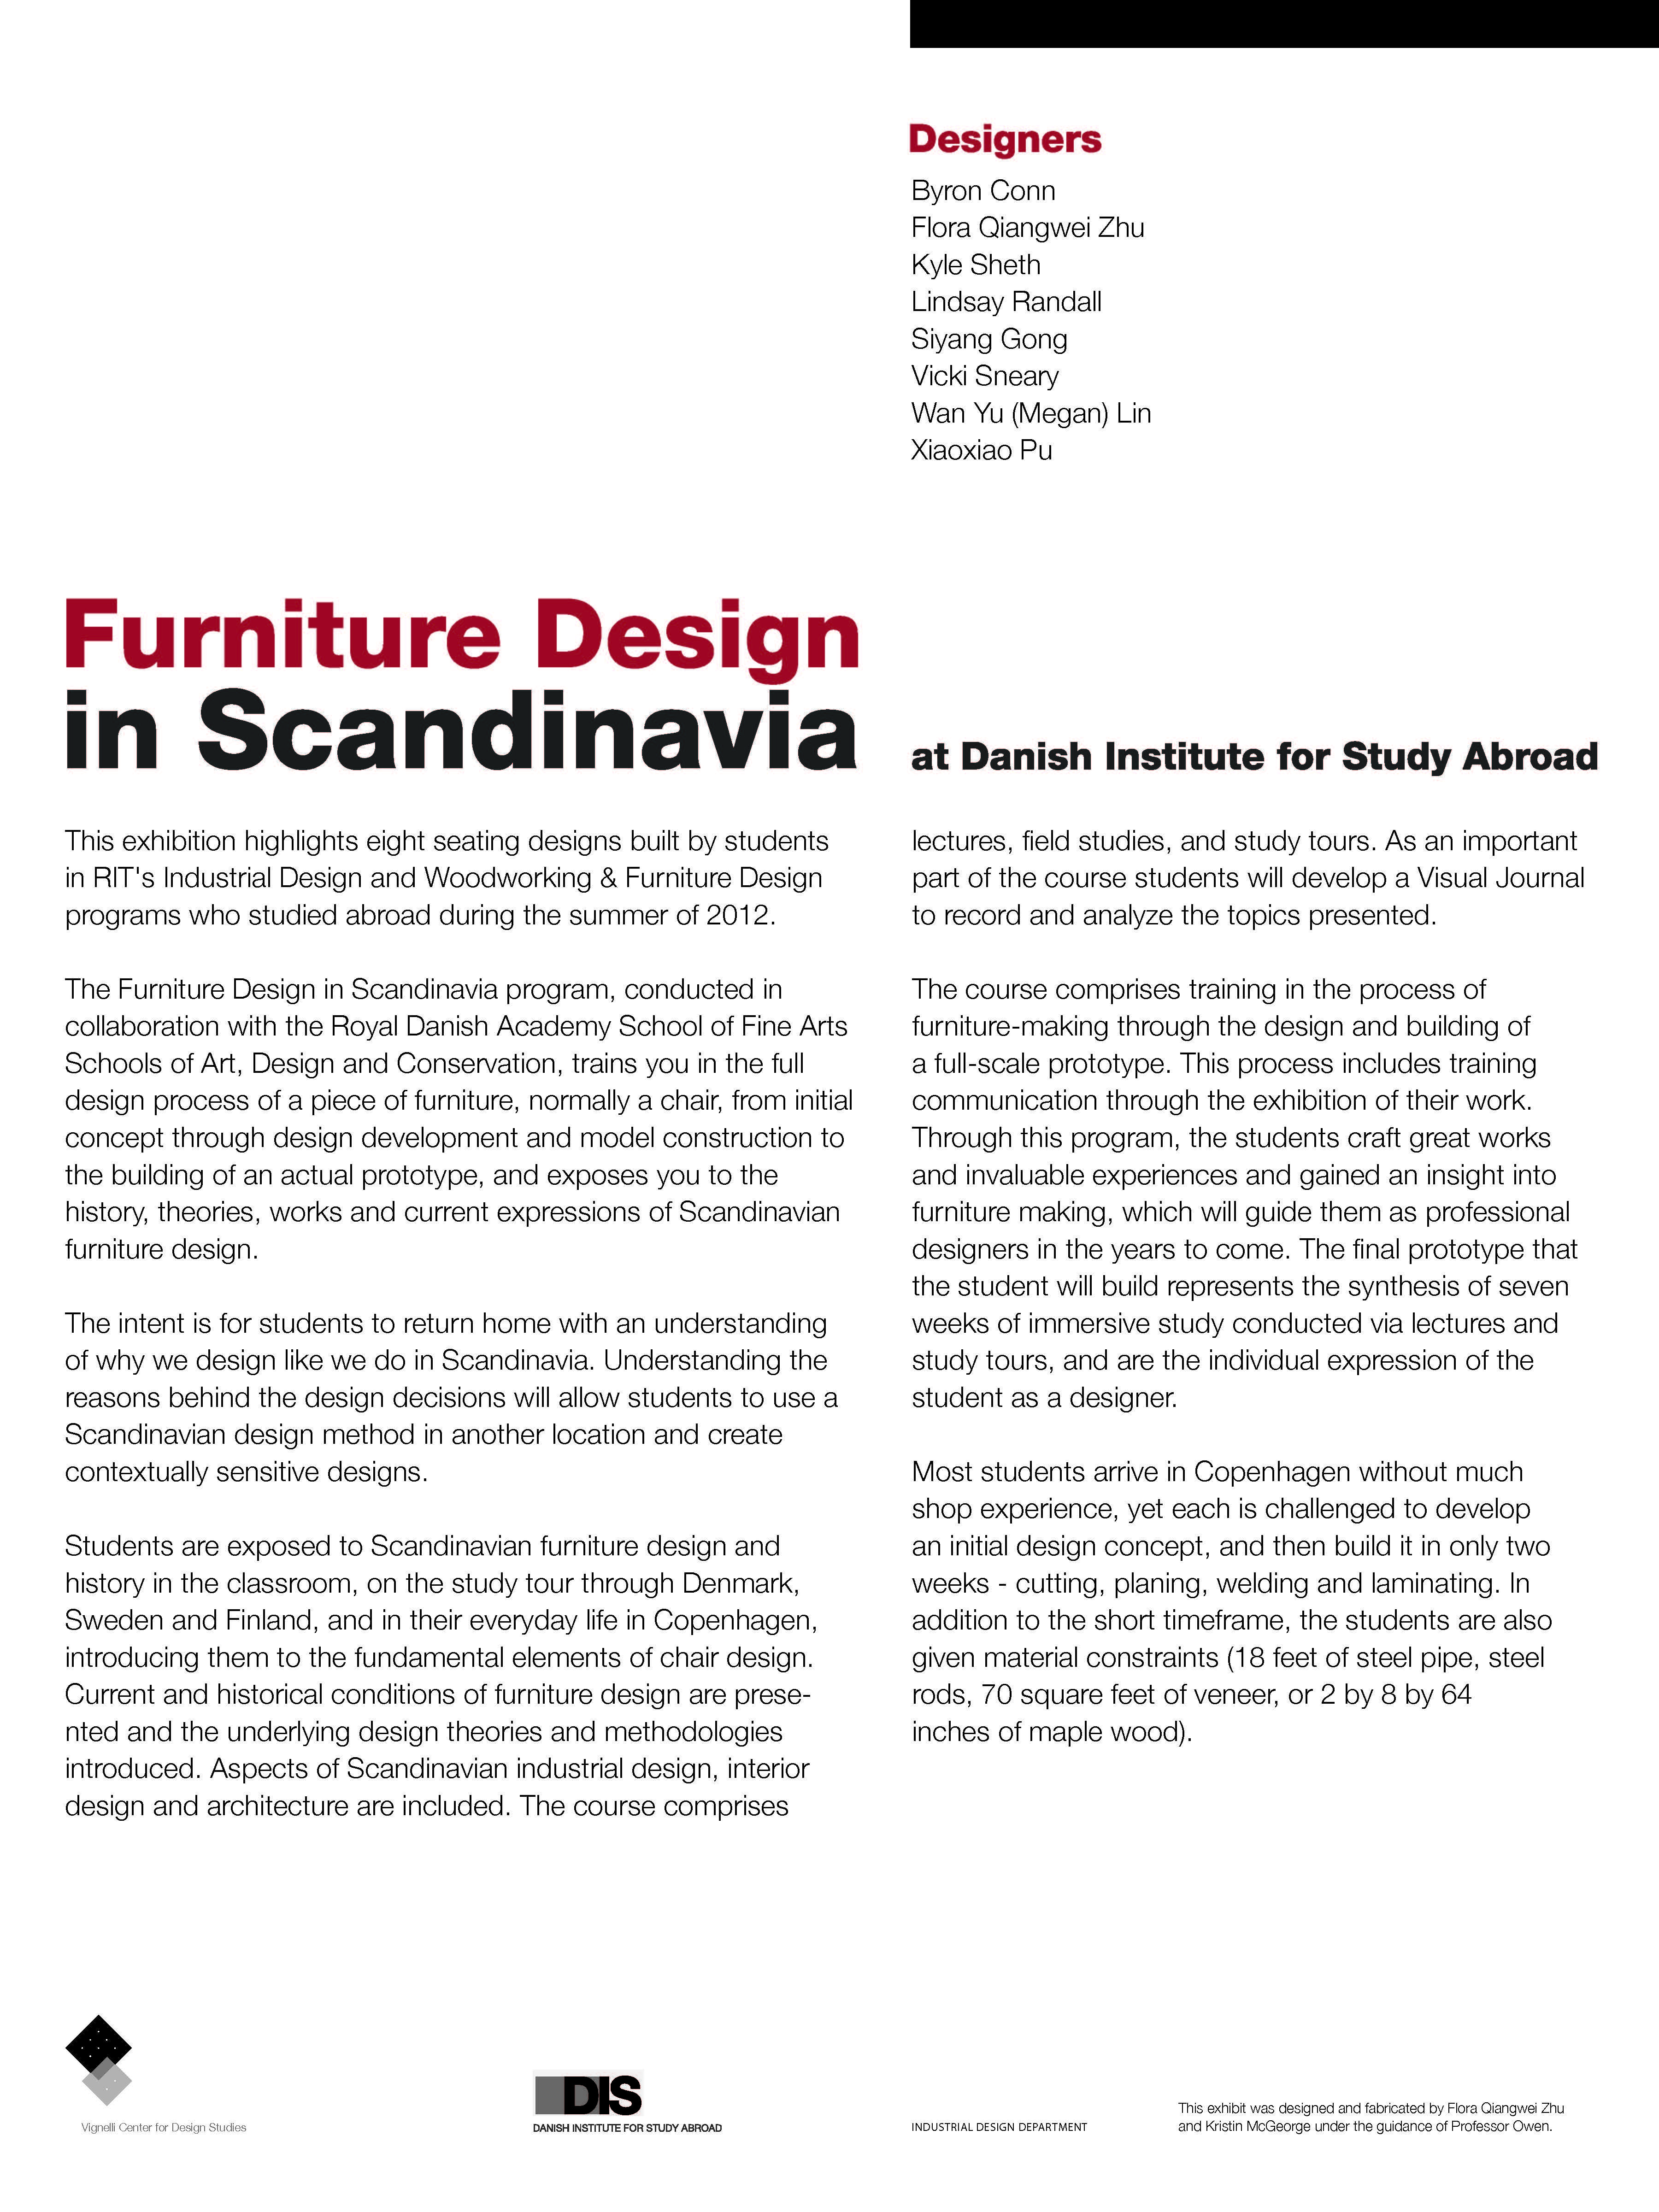 A document with a written story titled Furniture Design in Scandinavia.